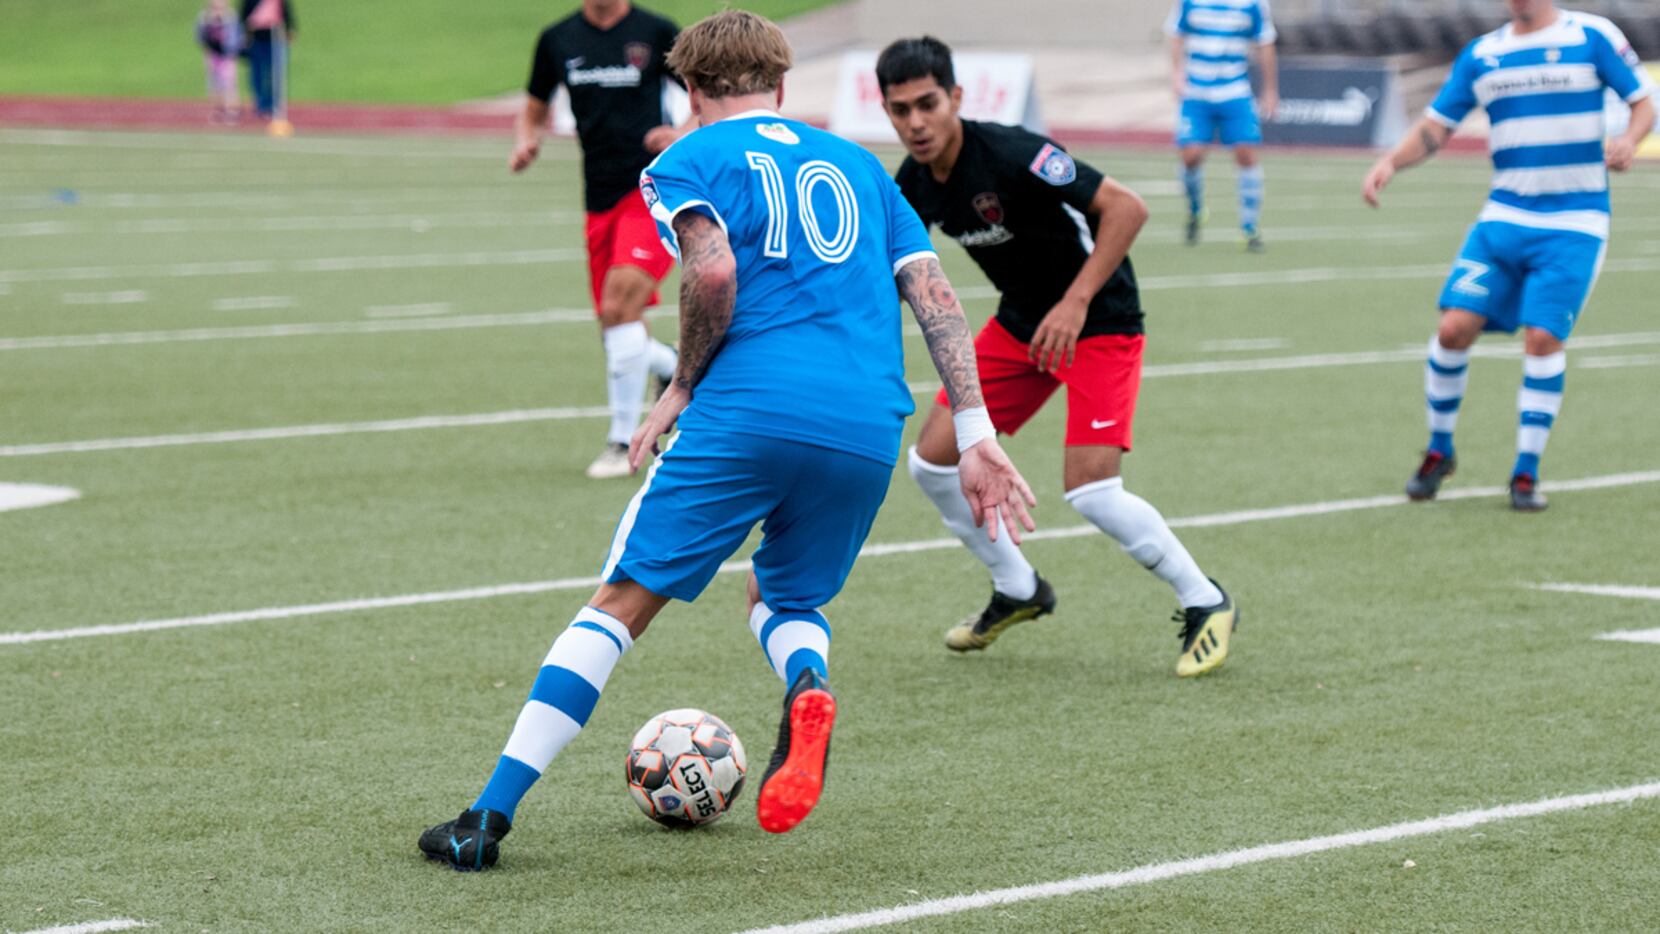 Jamie Lovegrove of the Fort Worth Vaqueros cuts back against the Tyler FC defense. (5-11-19)